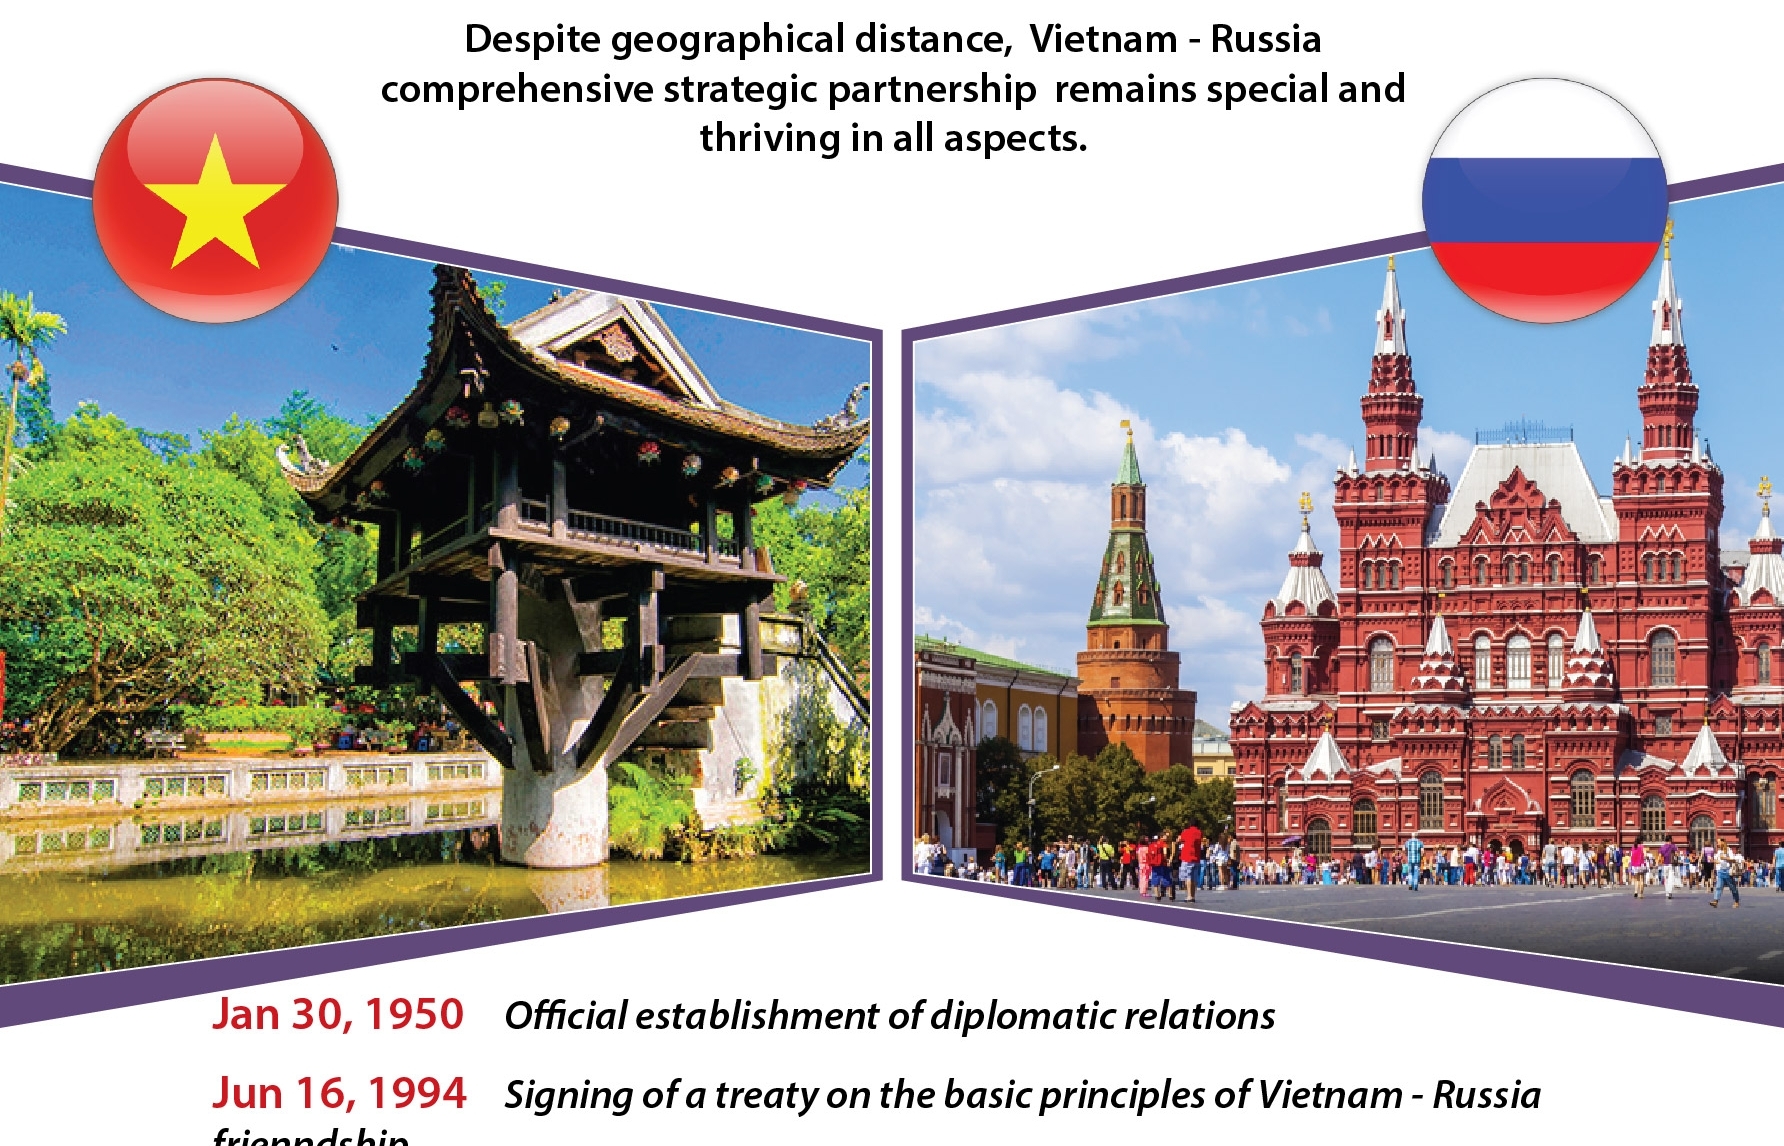 Vietnam-Russia comprehensive strategic partnership lifted in all areas